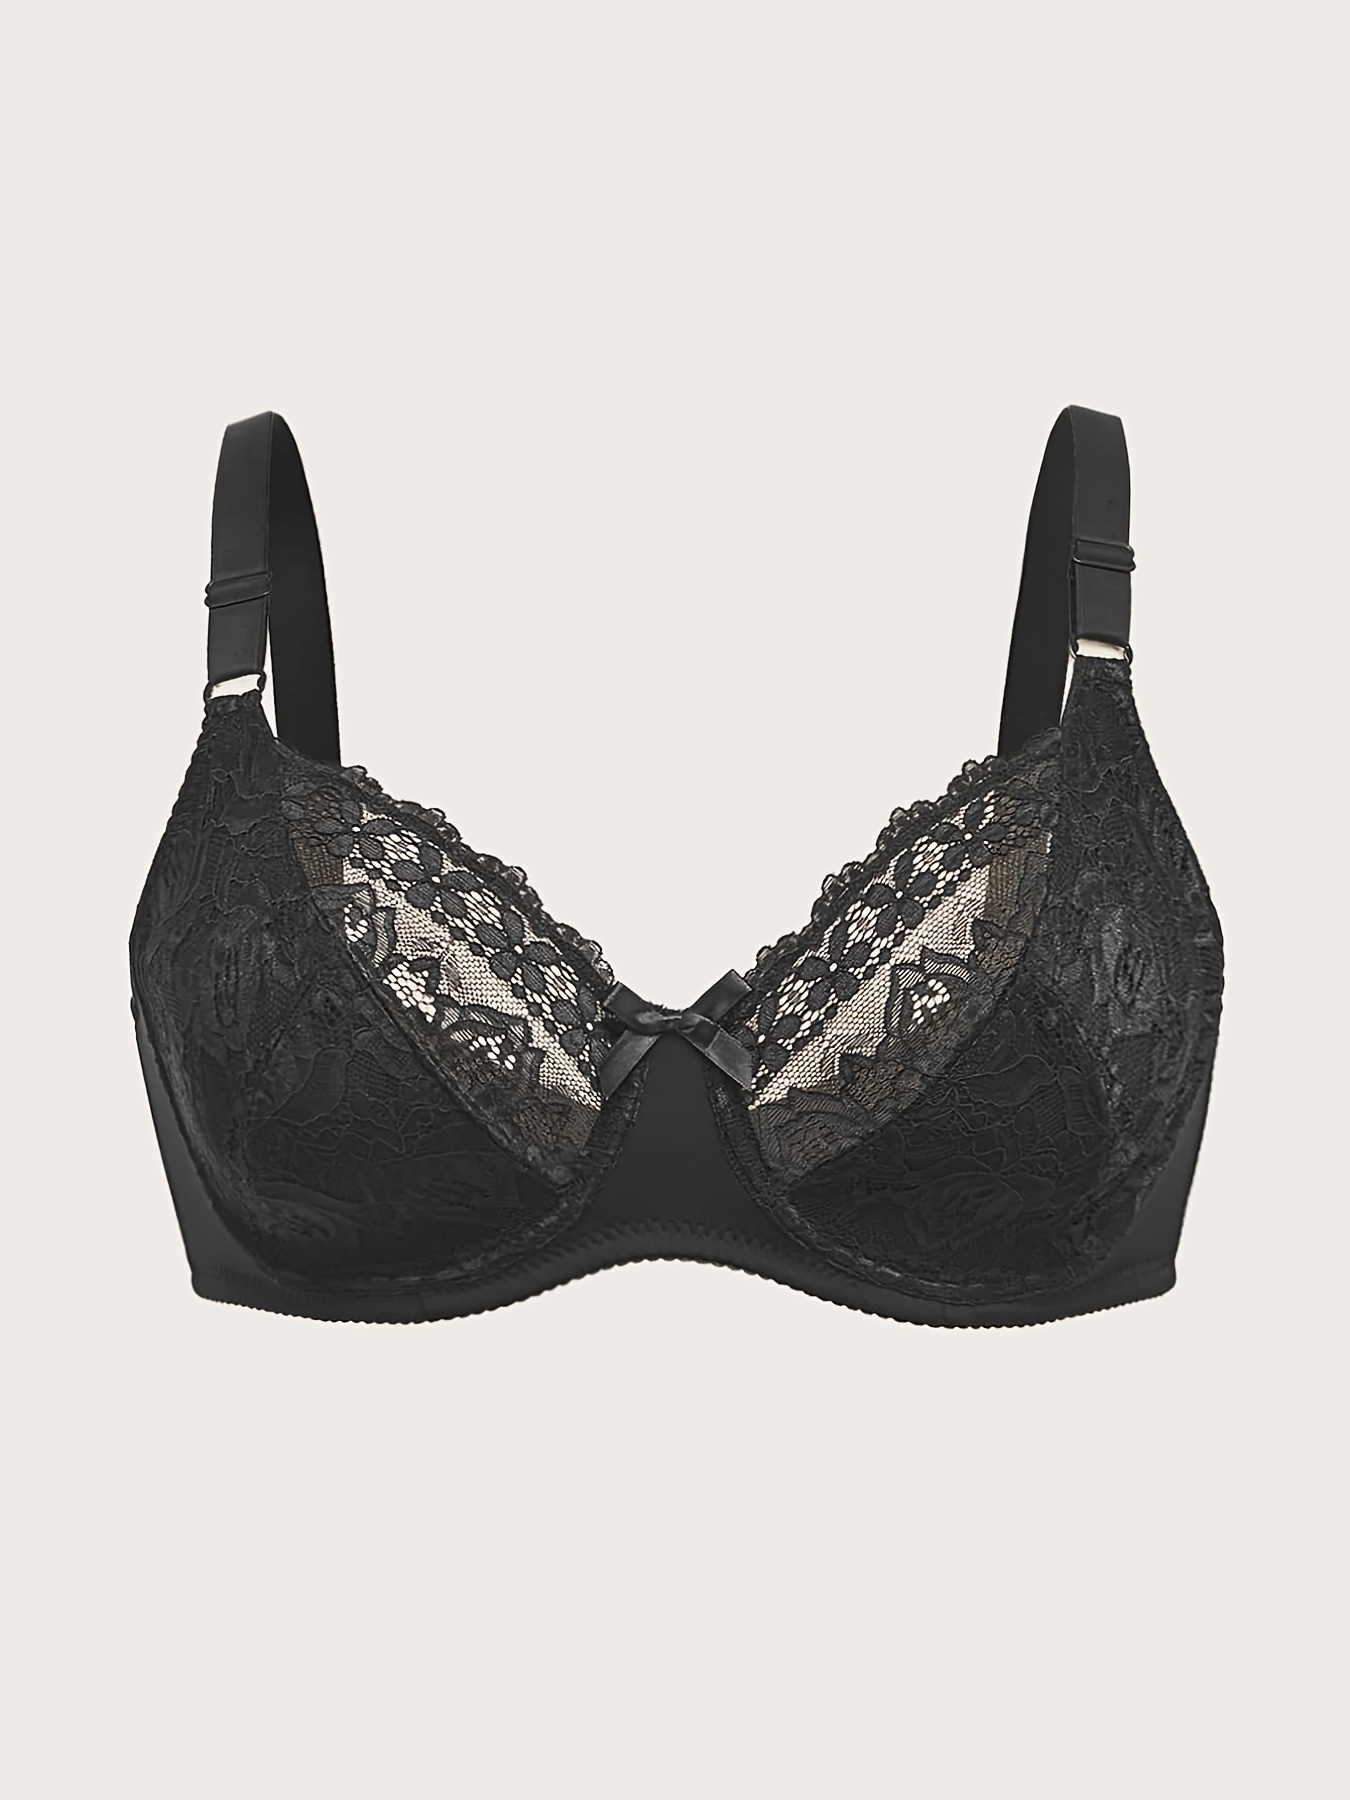 Plus Size Ultra-Thin Bra for Women Lace Sexy Bralette Full Cup